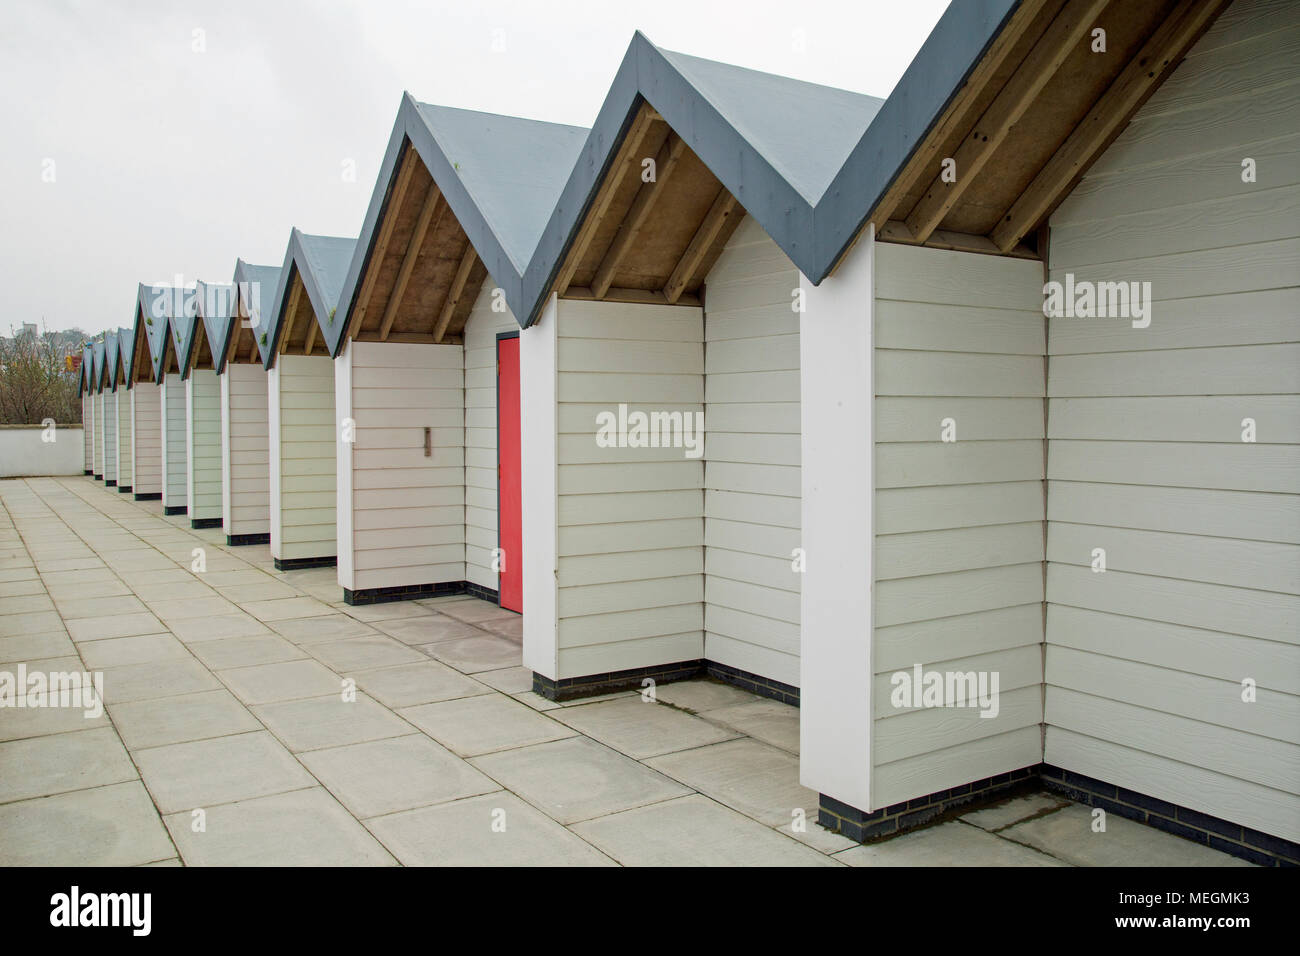 Swanage, Dorset, England, April 2018, a view of colorful beach huts Stock Photo